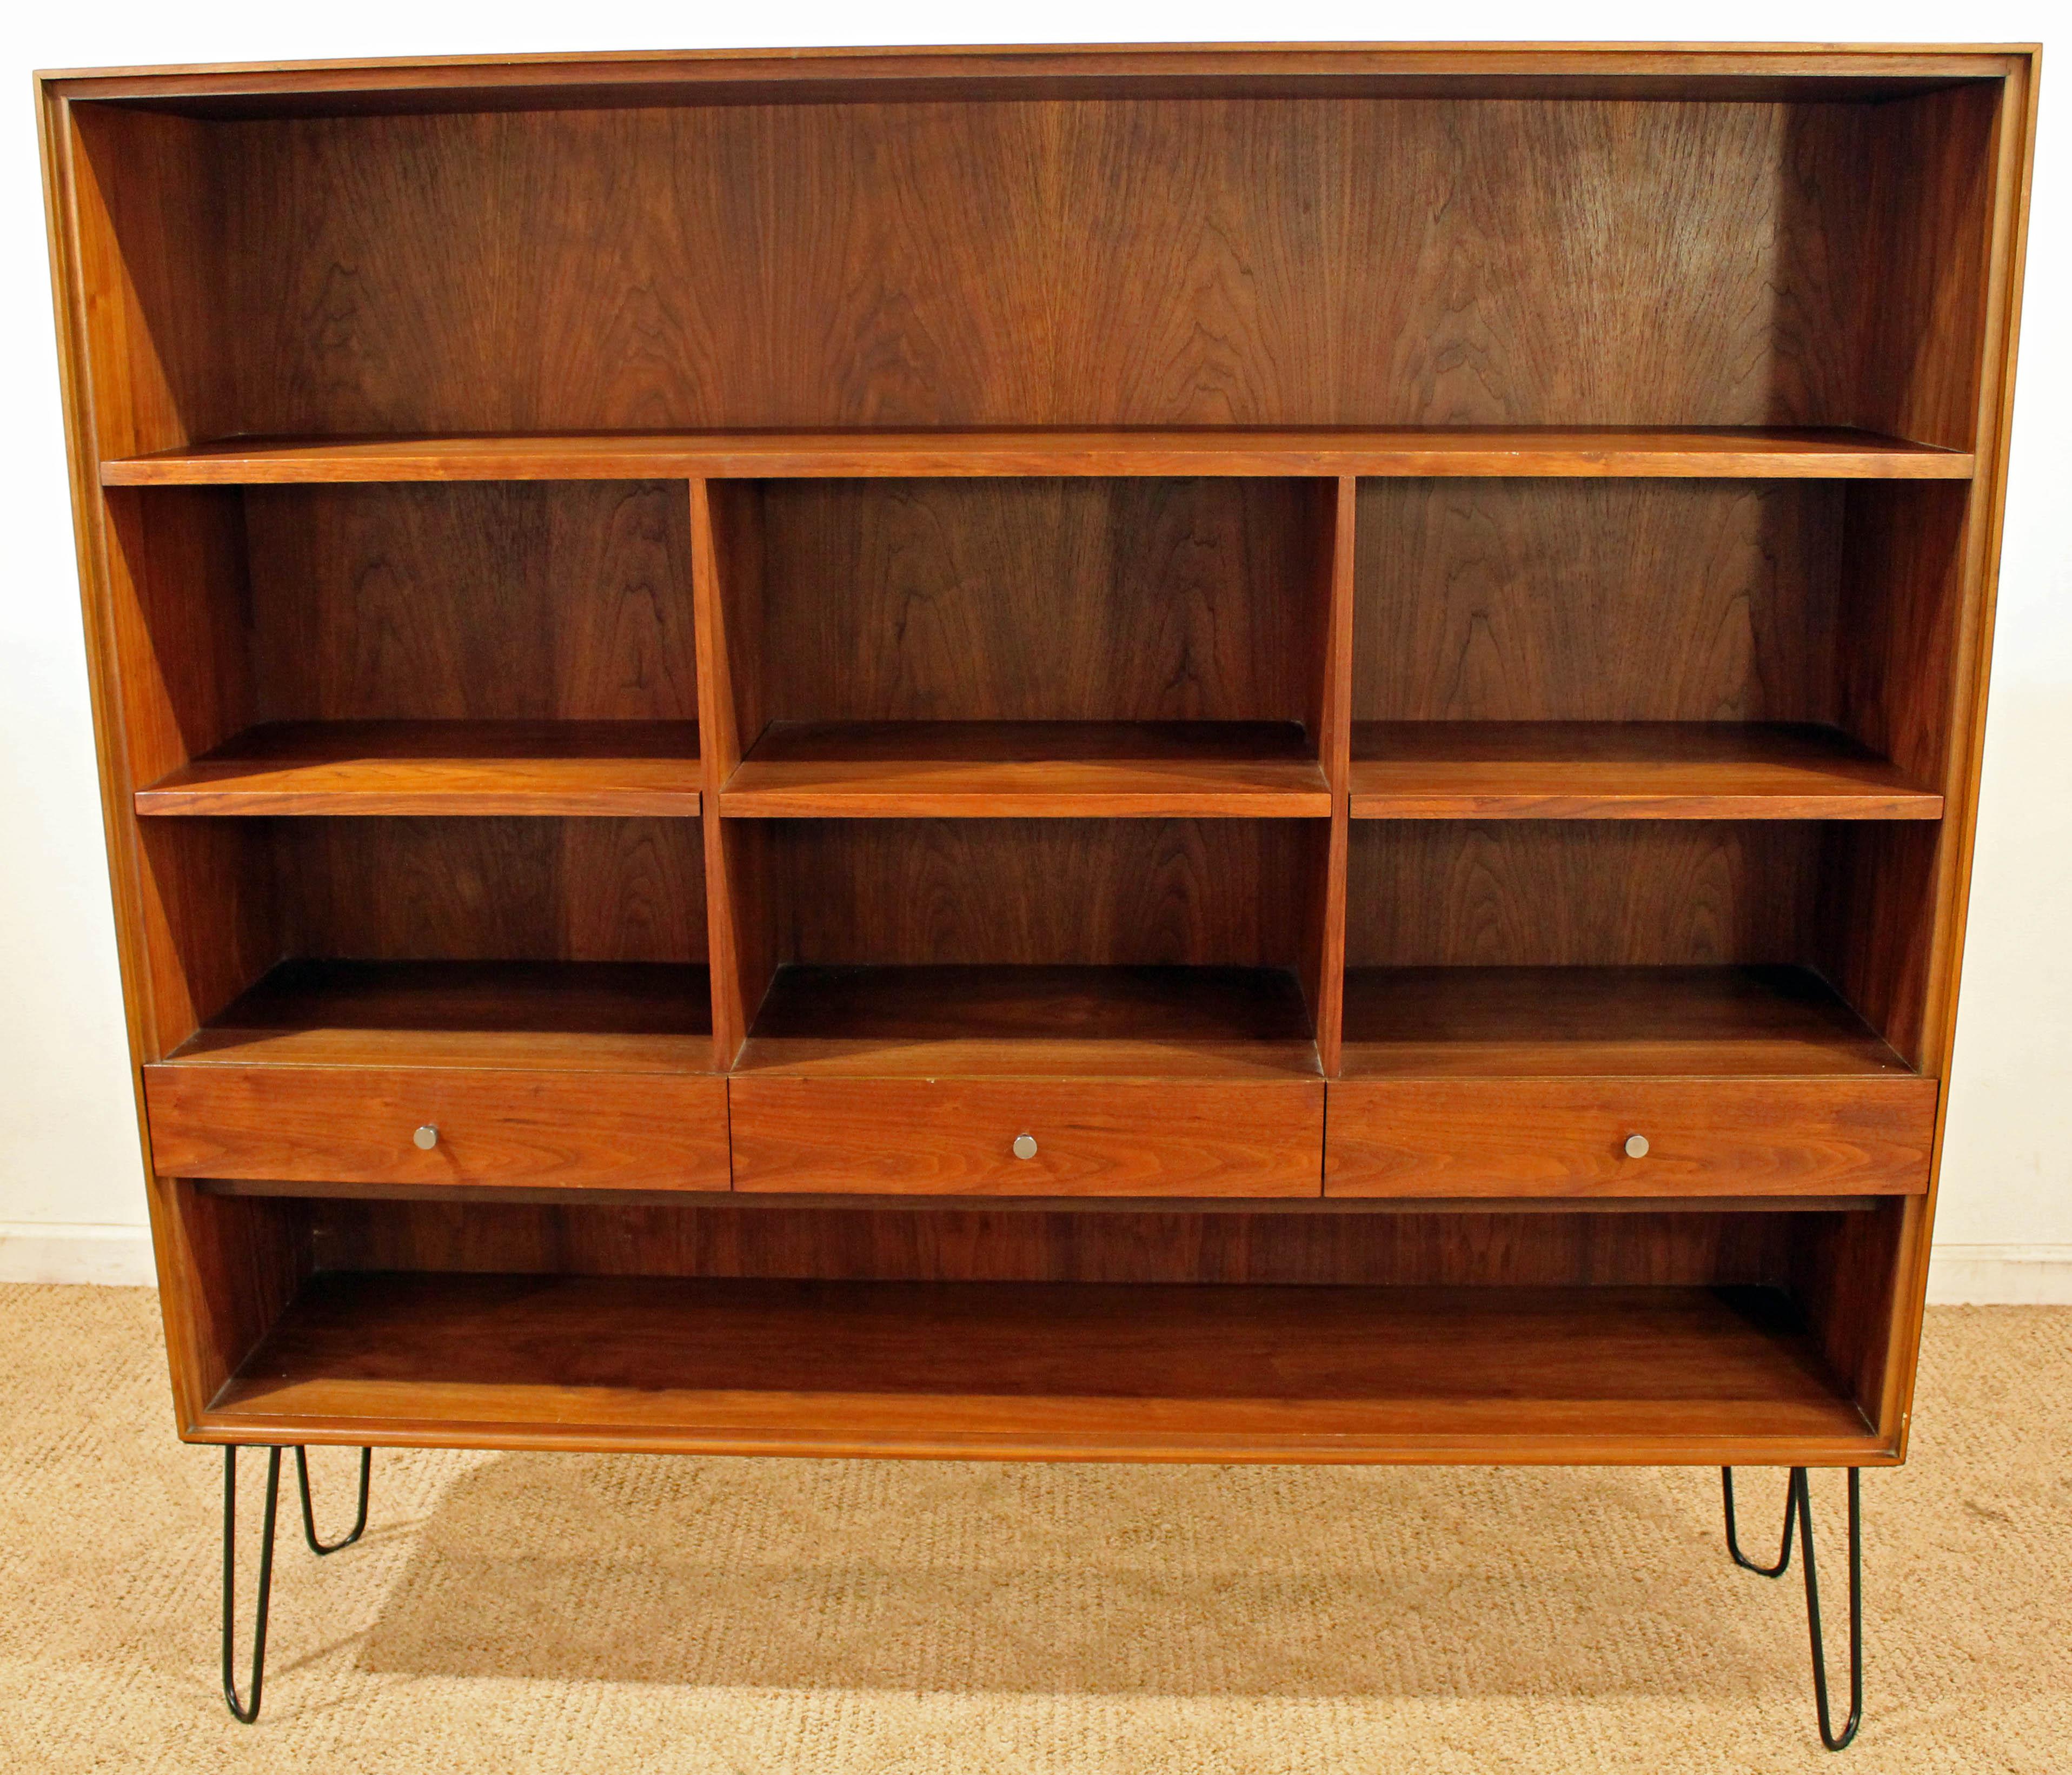 Offered is a piece of time and design: a Mid-Century Modern bookcase on hairpin legs. This piece was originally a hutch top, designed by Paul McCobb 'Declaration' by Lane. Metal legs have been added. It is made of walnut, with multiple shelves and